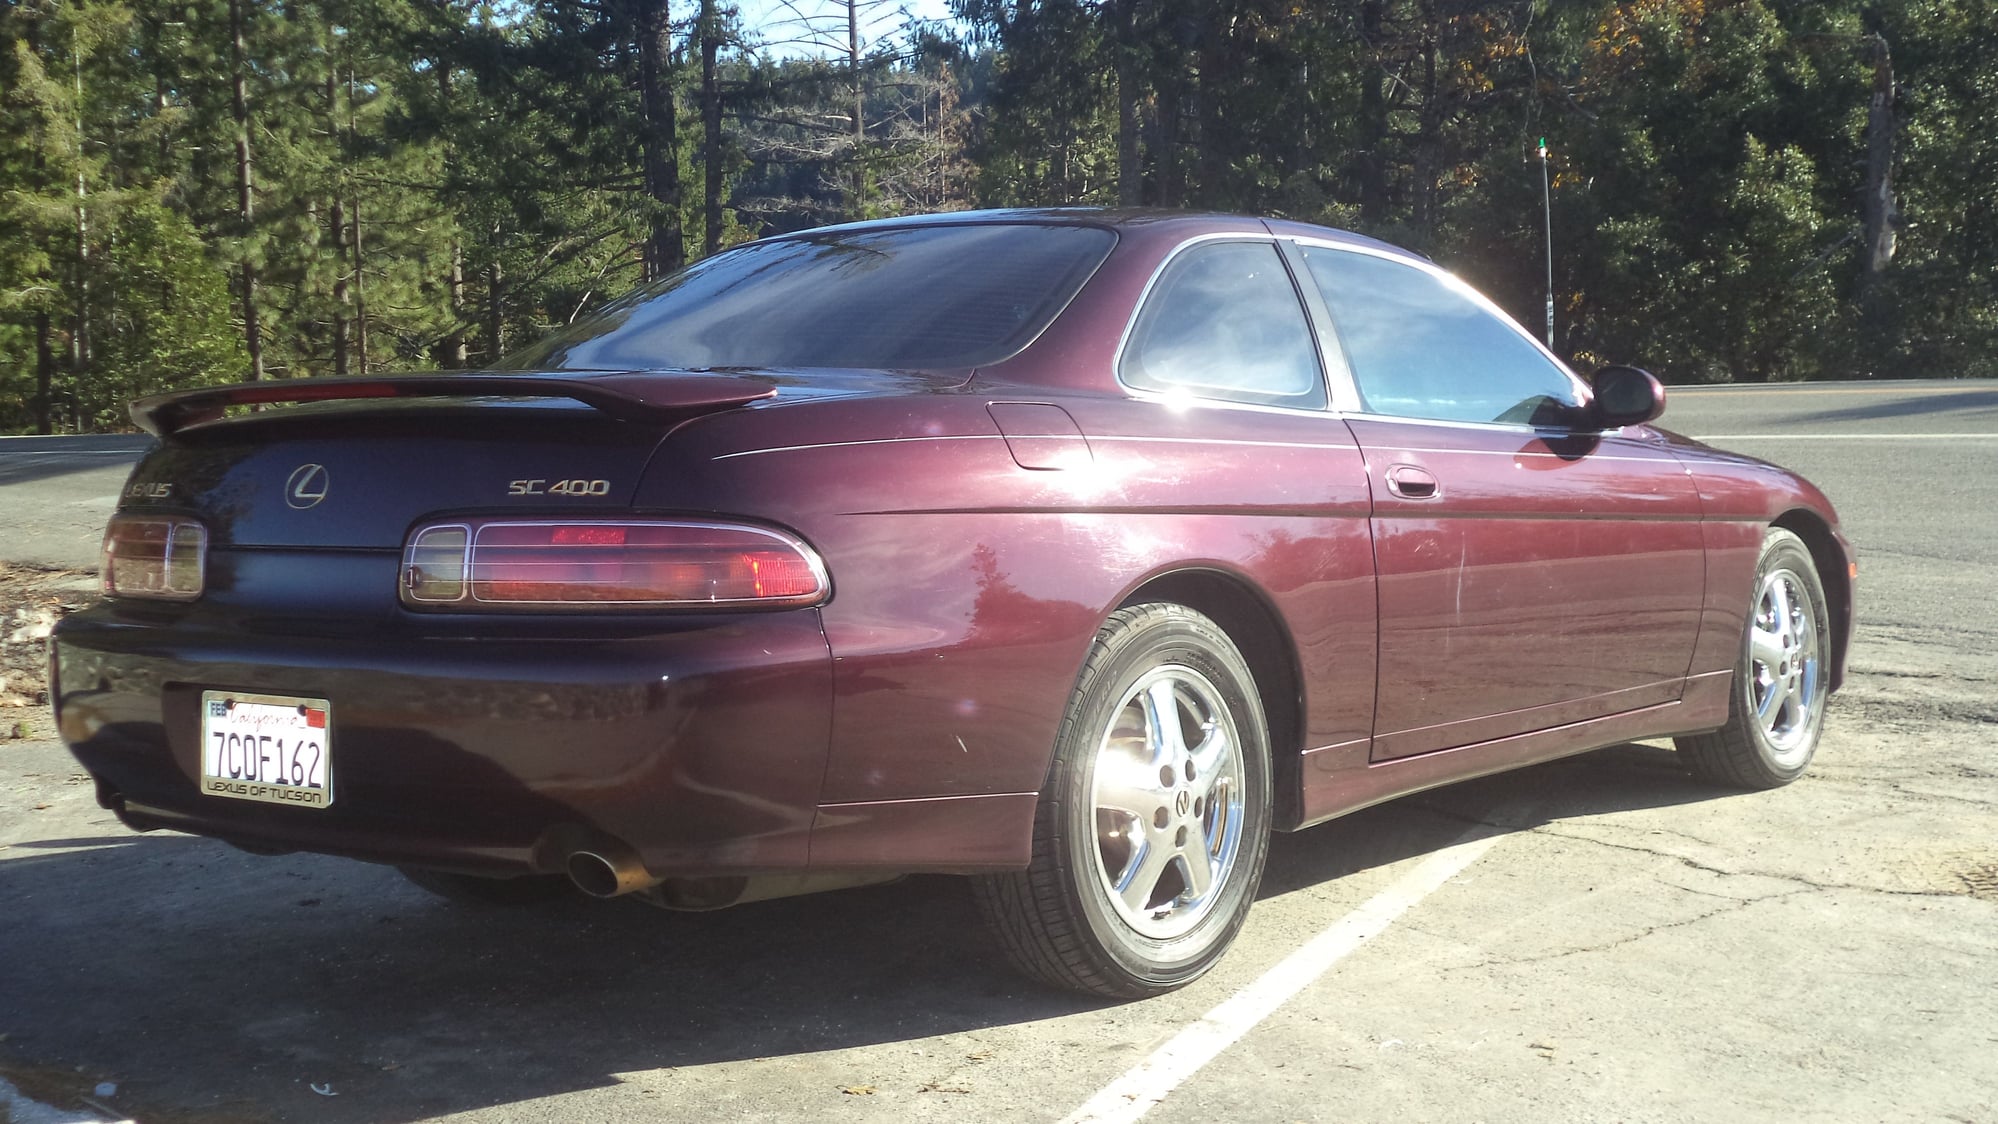 1998 Lexus SC400 - 1 of Only 3200 Porduced with VVTI 300Hp with 5spd Auto Meticulously maintained - Used - VIN JT8CH32Y8W1000744 - 216,000 Miles - 8 cyl - 2WD - Automatic - Coupe - Other - Sacramento, CA 95959, United States